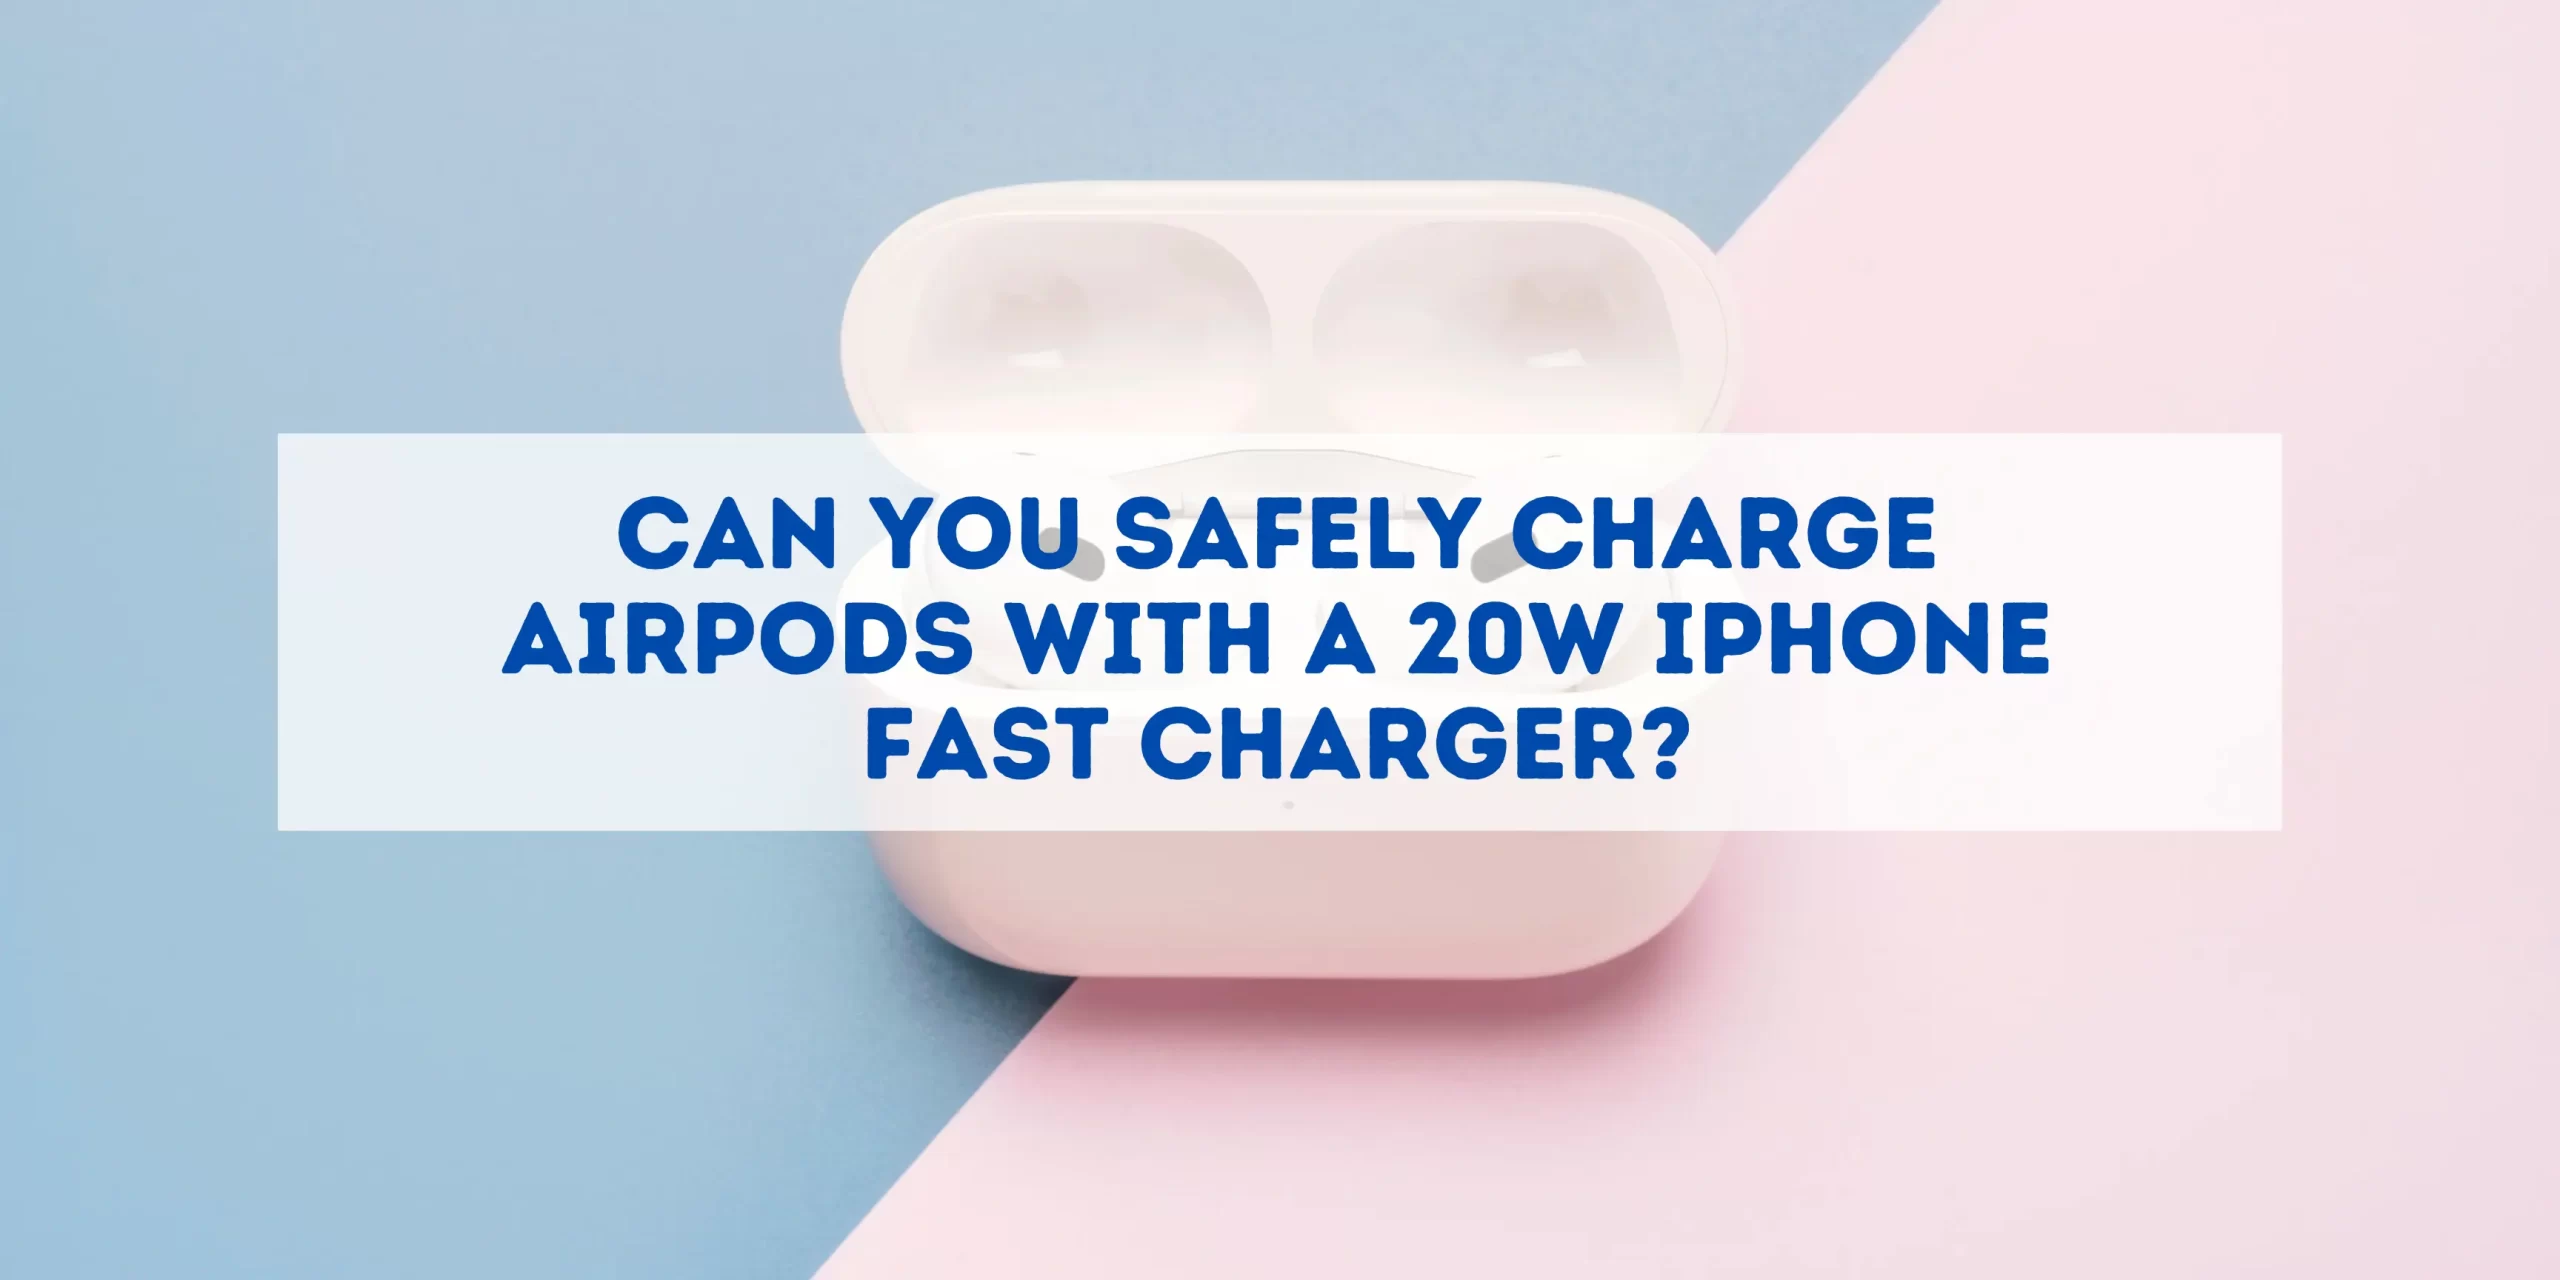 Safely Charge AirPods with a 20W iPhone Fast Charger